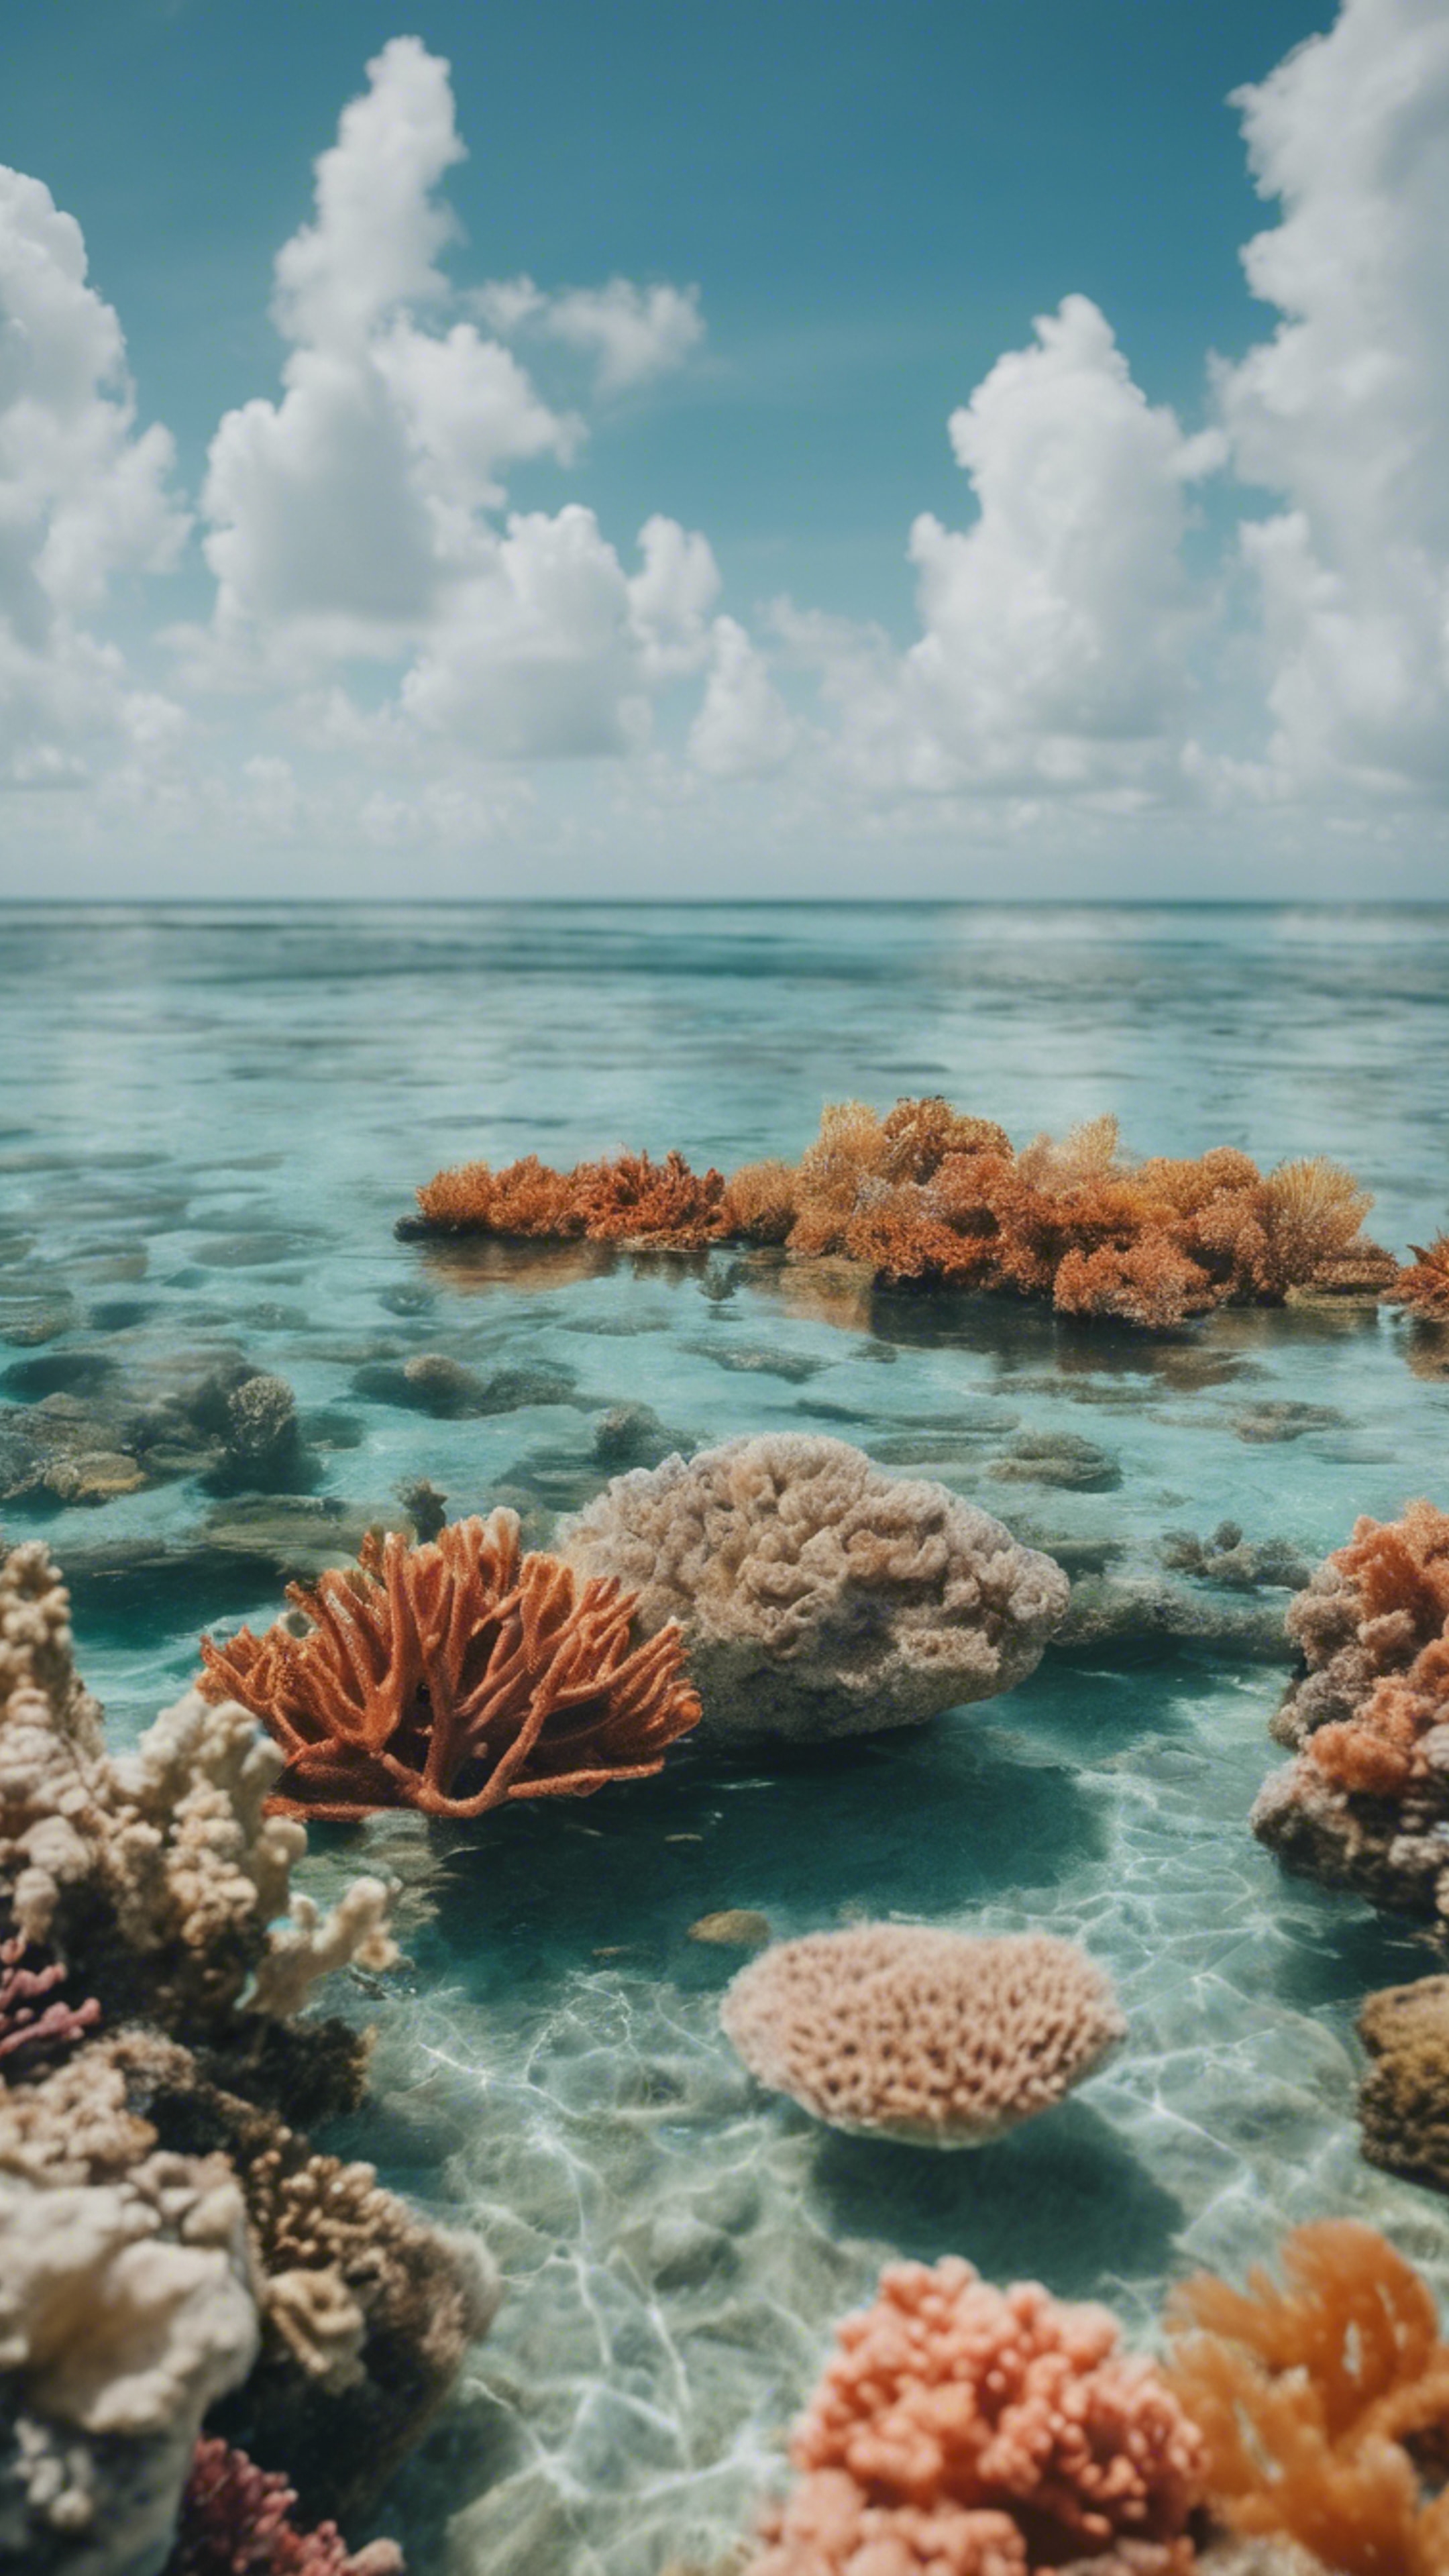 A serene view of the Florida Keys with crystal clear water and a colorful coral reef visible underwater. Дэлгэцийн зураг[53a9c37260d942df83c4]